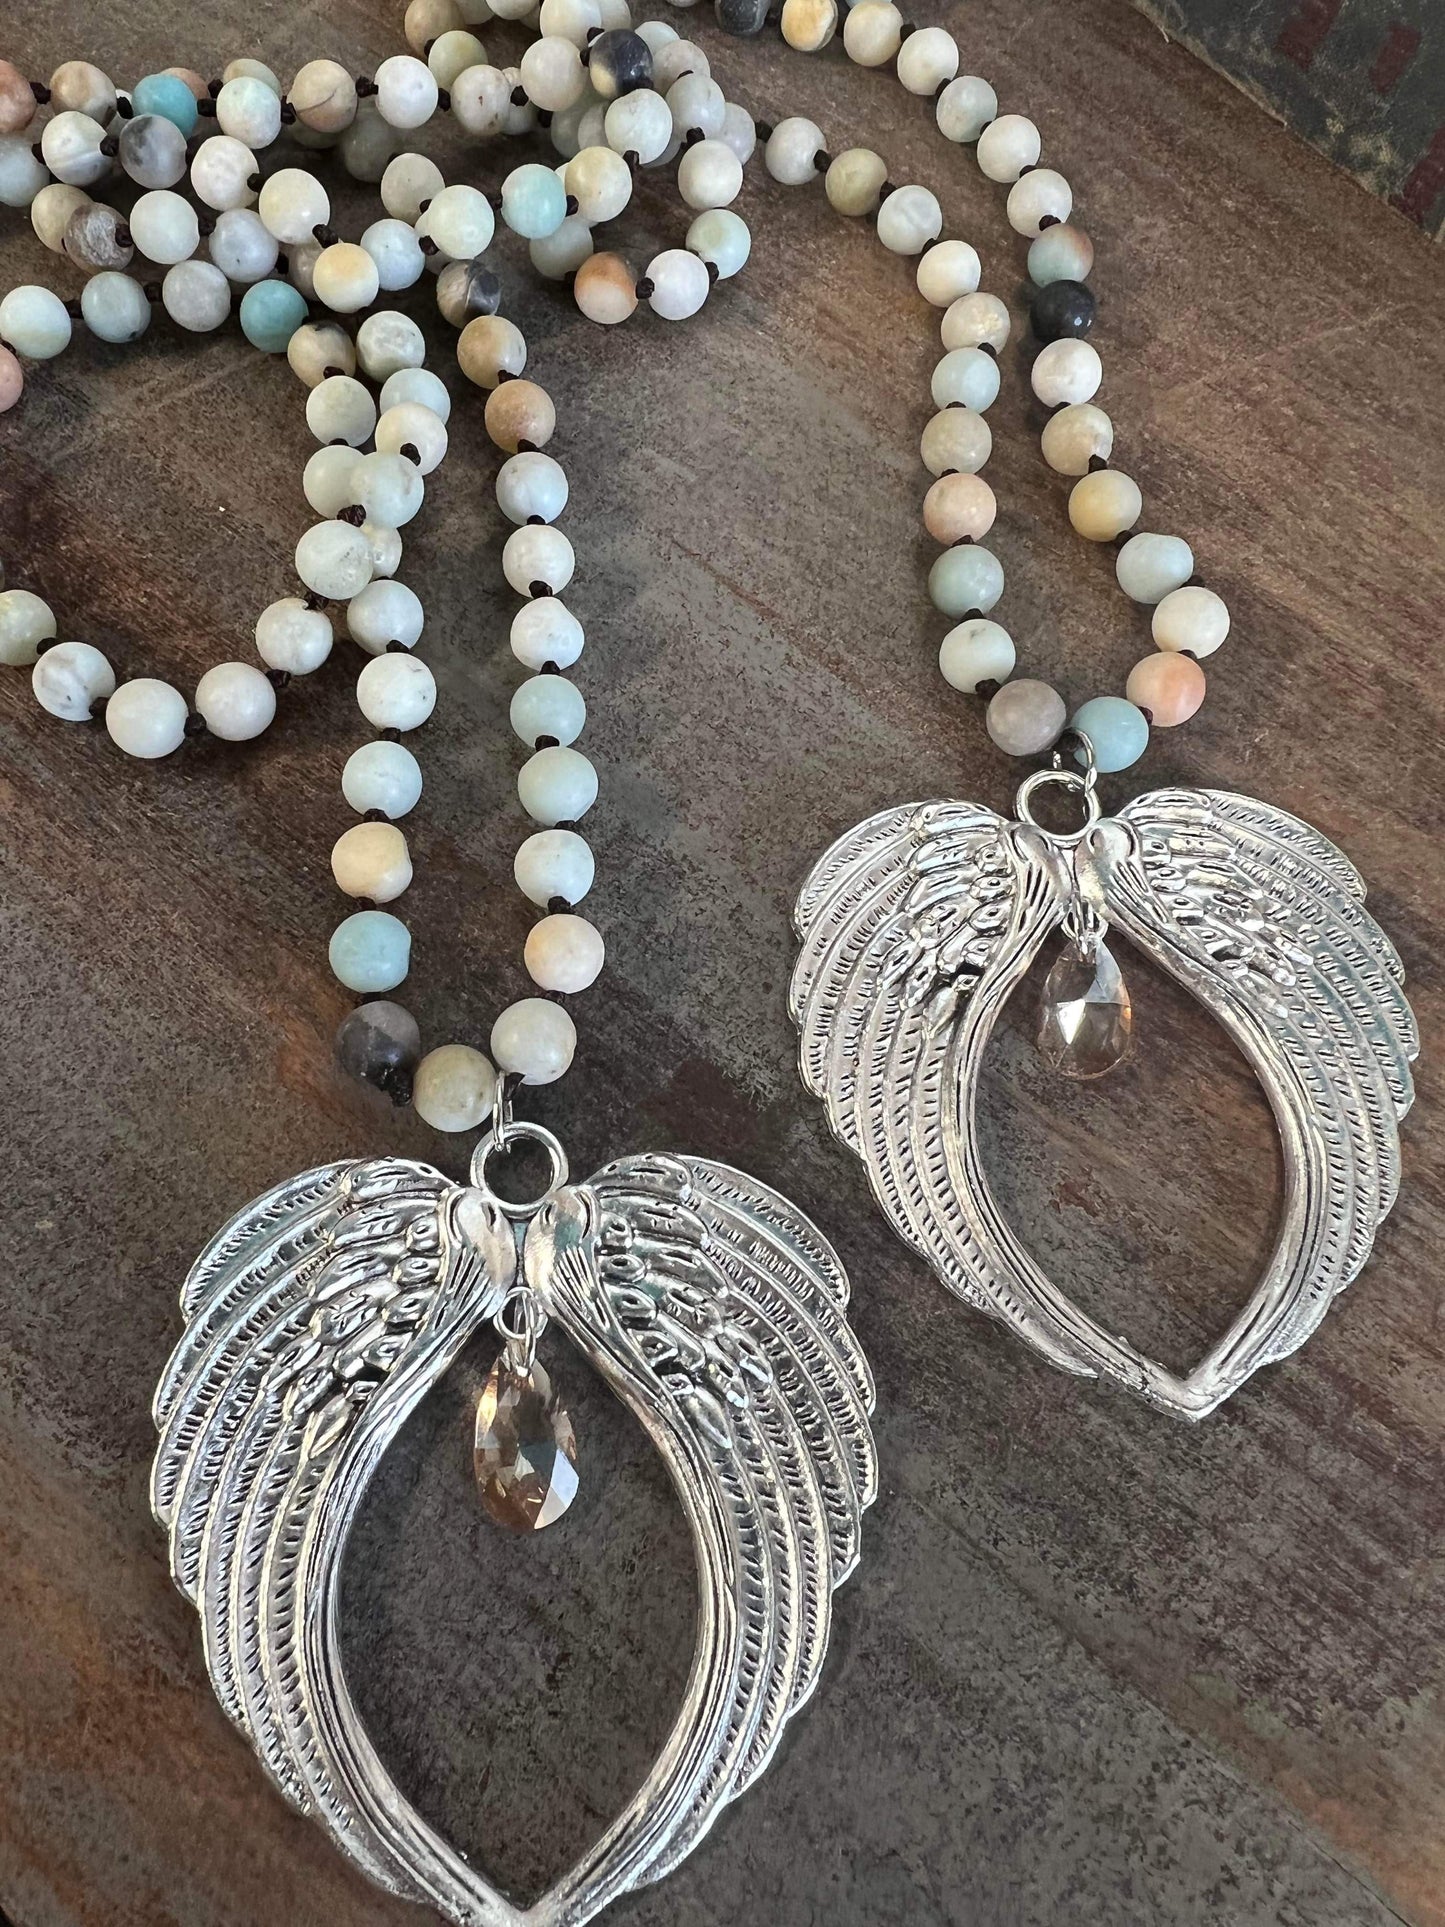 Natural stone bead with Angel wings pendant